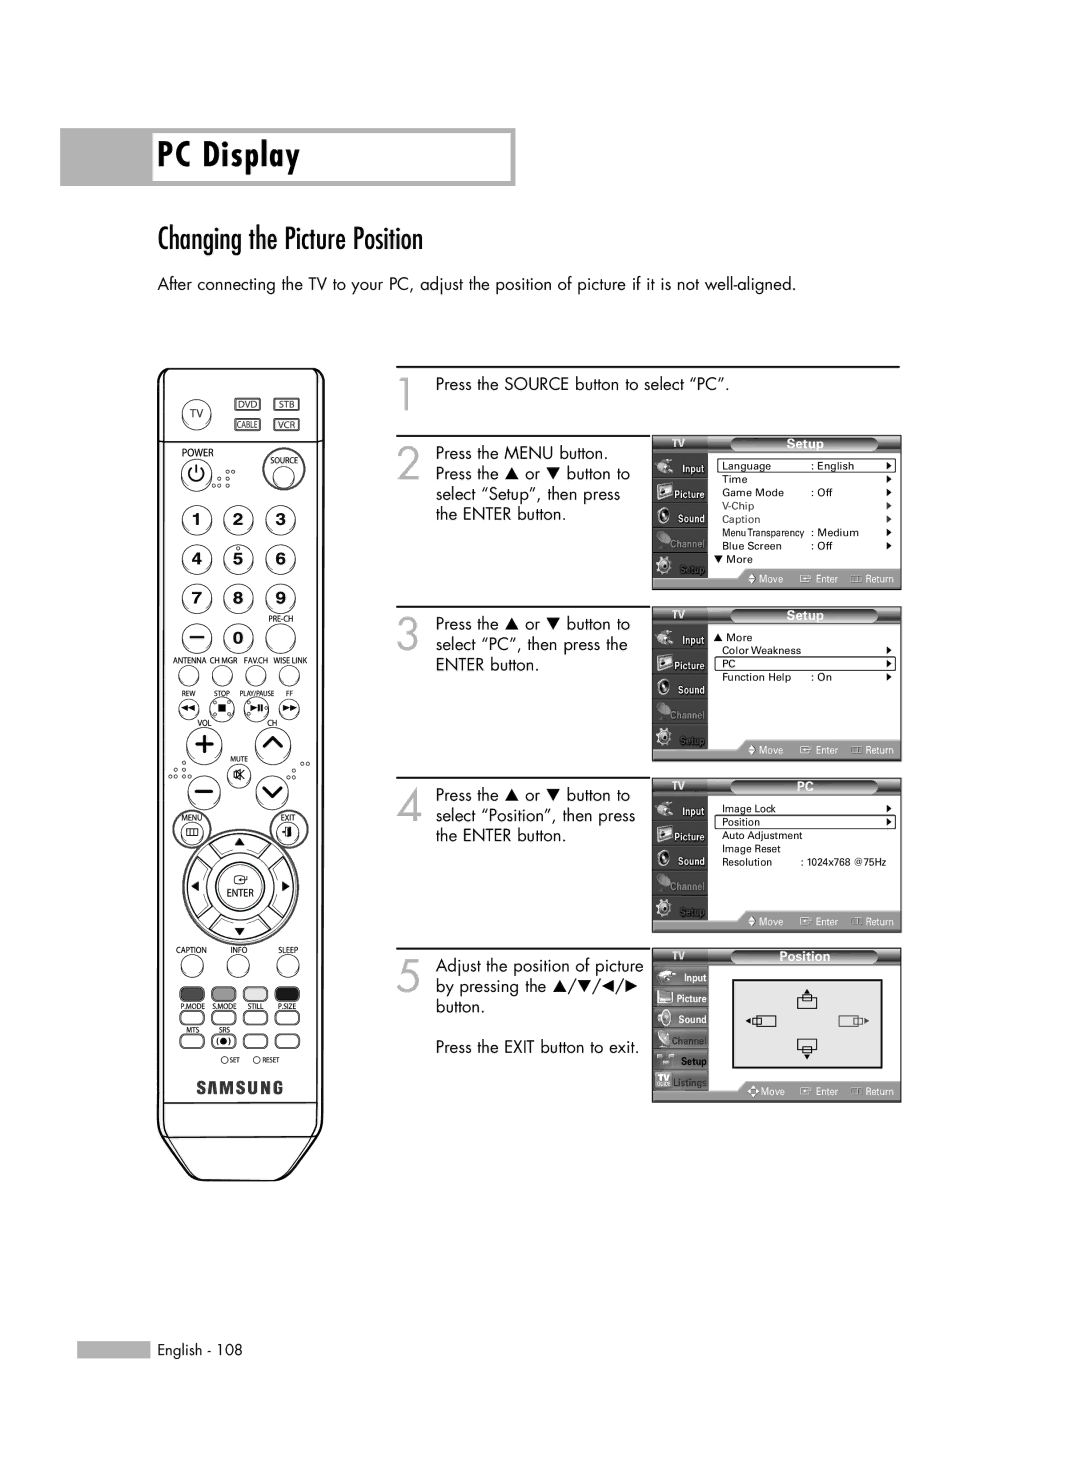 Samsung HL-S6166W, HL-S5066W, HL-S4666W, HL-S5666W manual Changing the Picture Position 